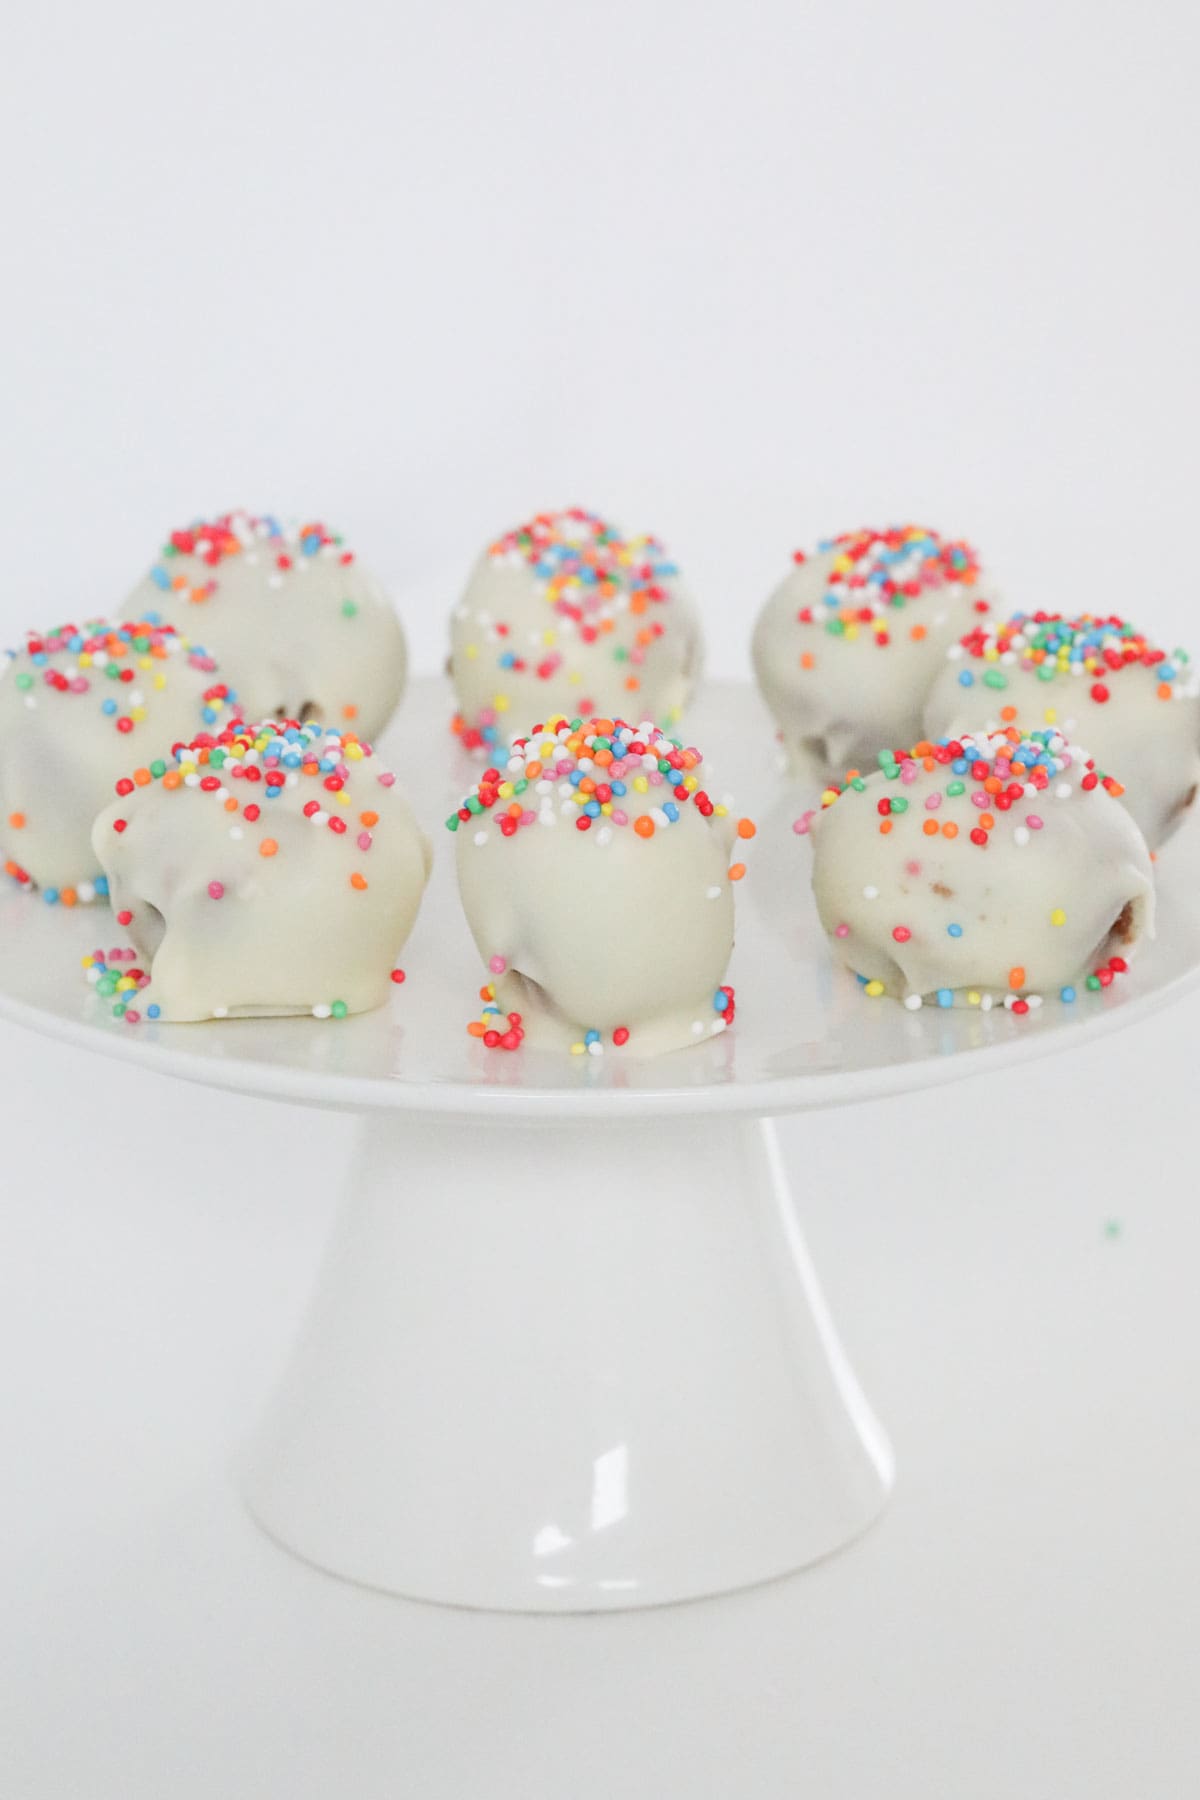 A plate of white chocolate coated dessert balls.